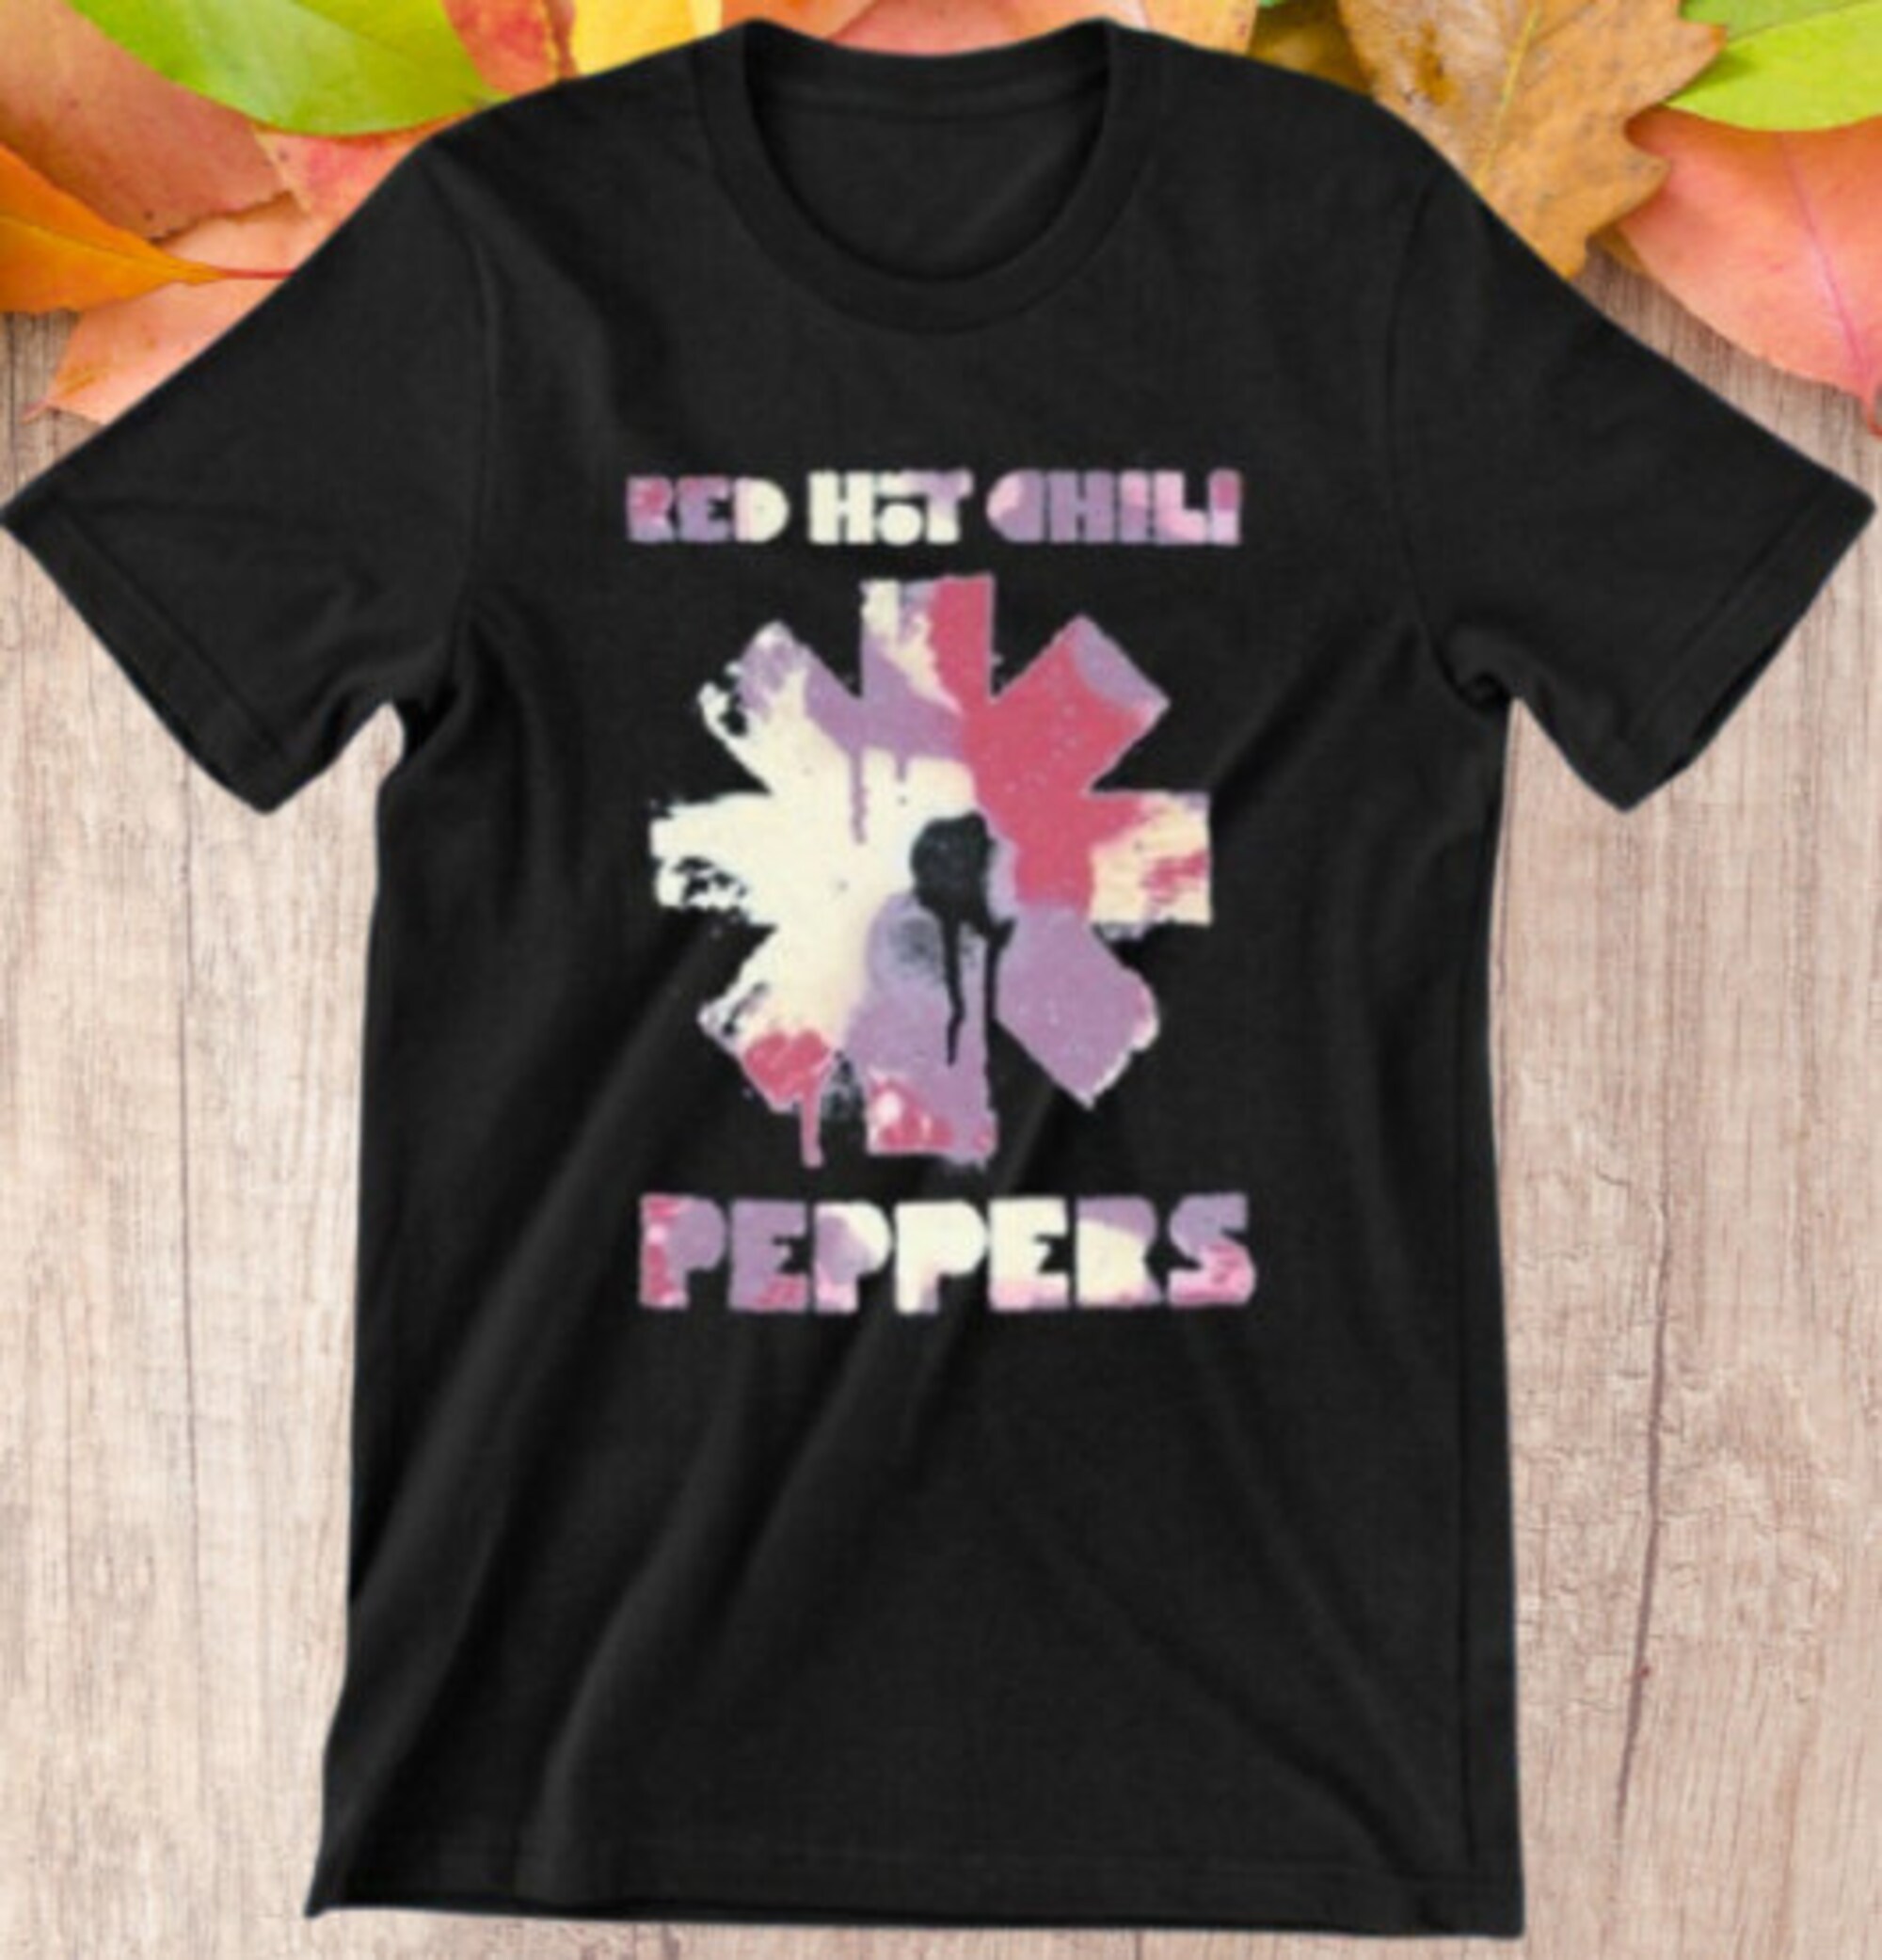 Red Hot Chili Peppers Shirt, Red Hot Chili Peppers Paint Asterisk Vintage Shirt